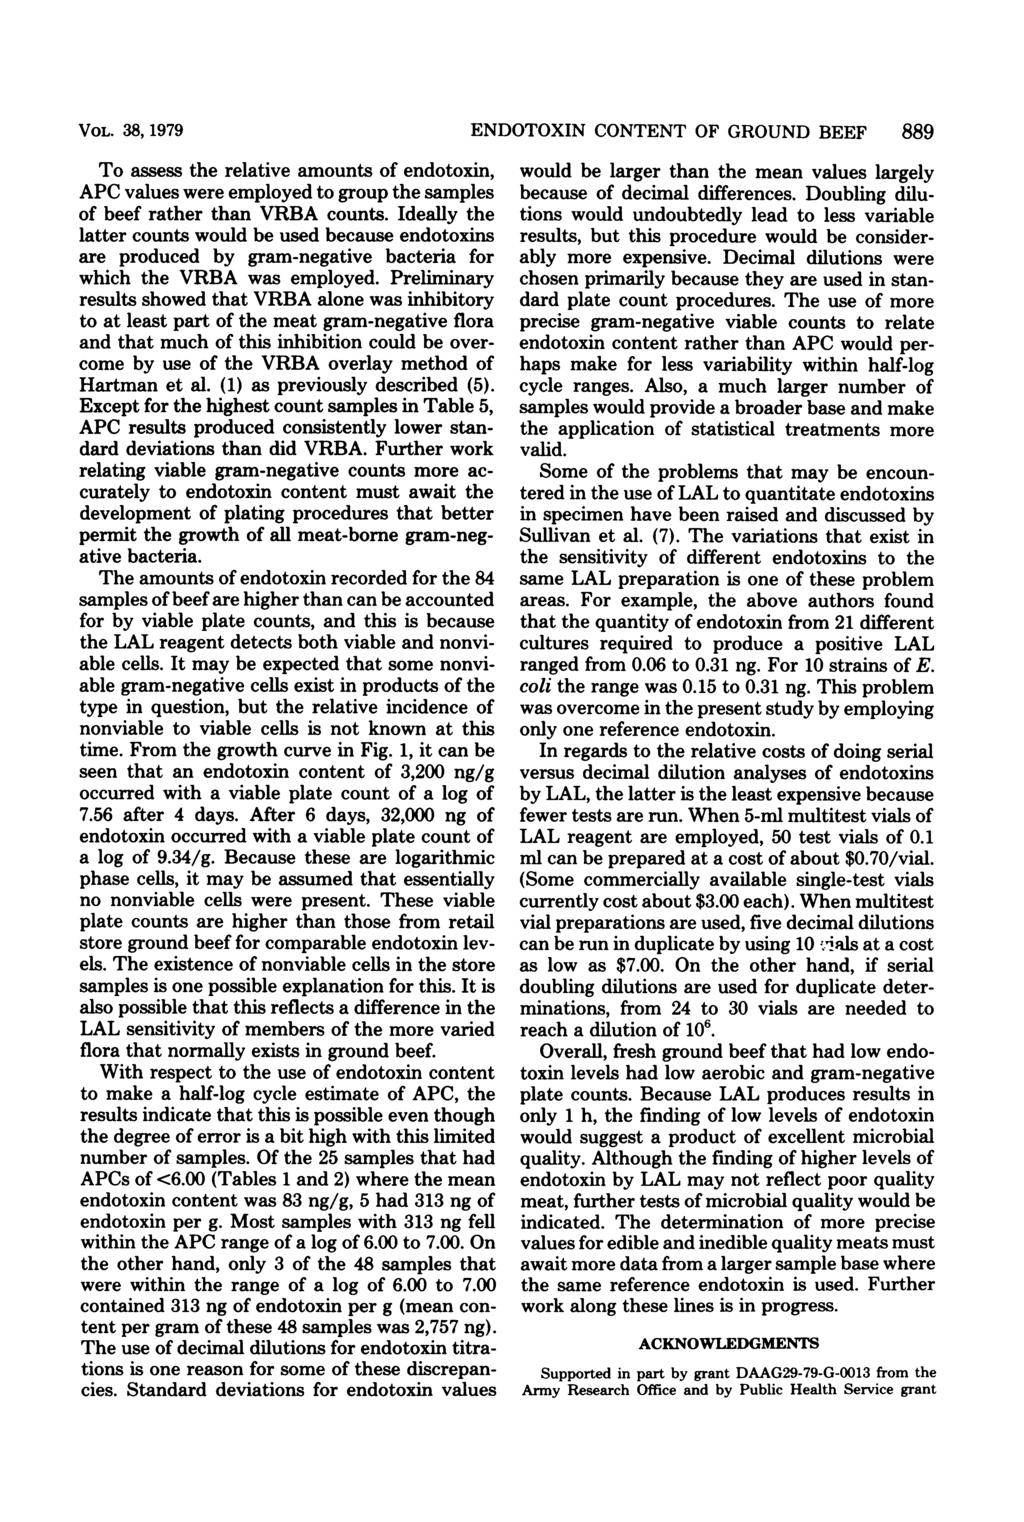 VOL. 38, 1979 To assess the relative amounts of endotoxin, APC values were employed to group the samples of beef rather than VRBA counts.